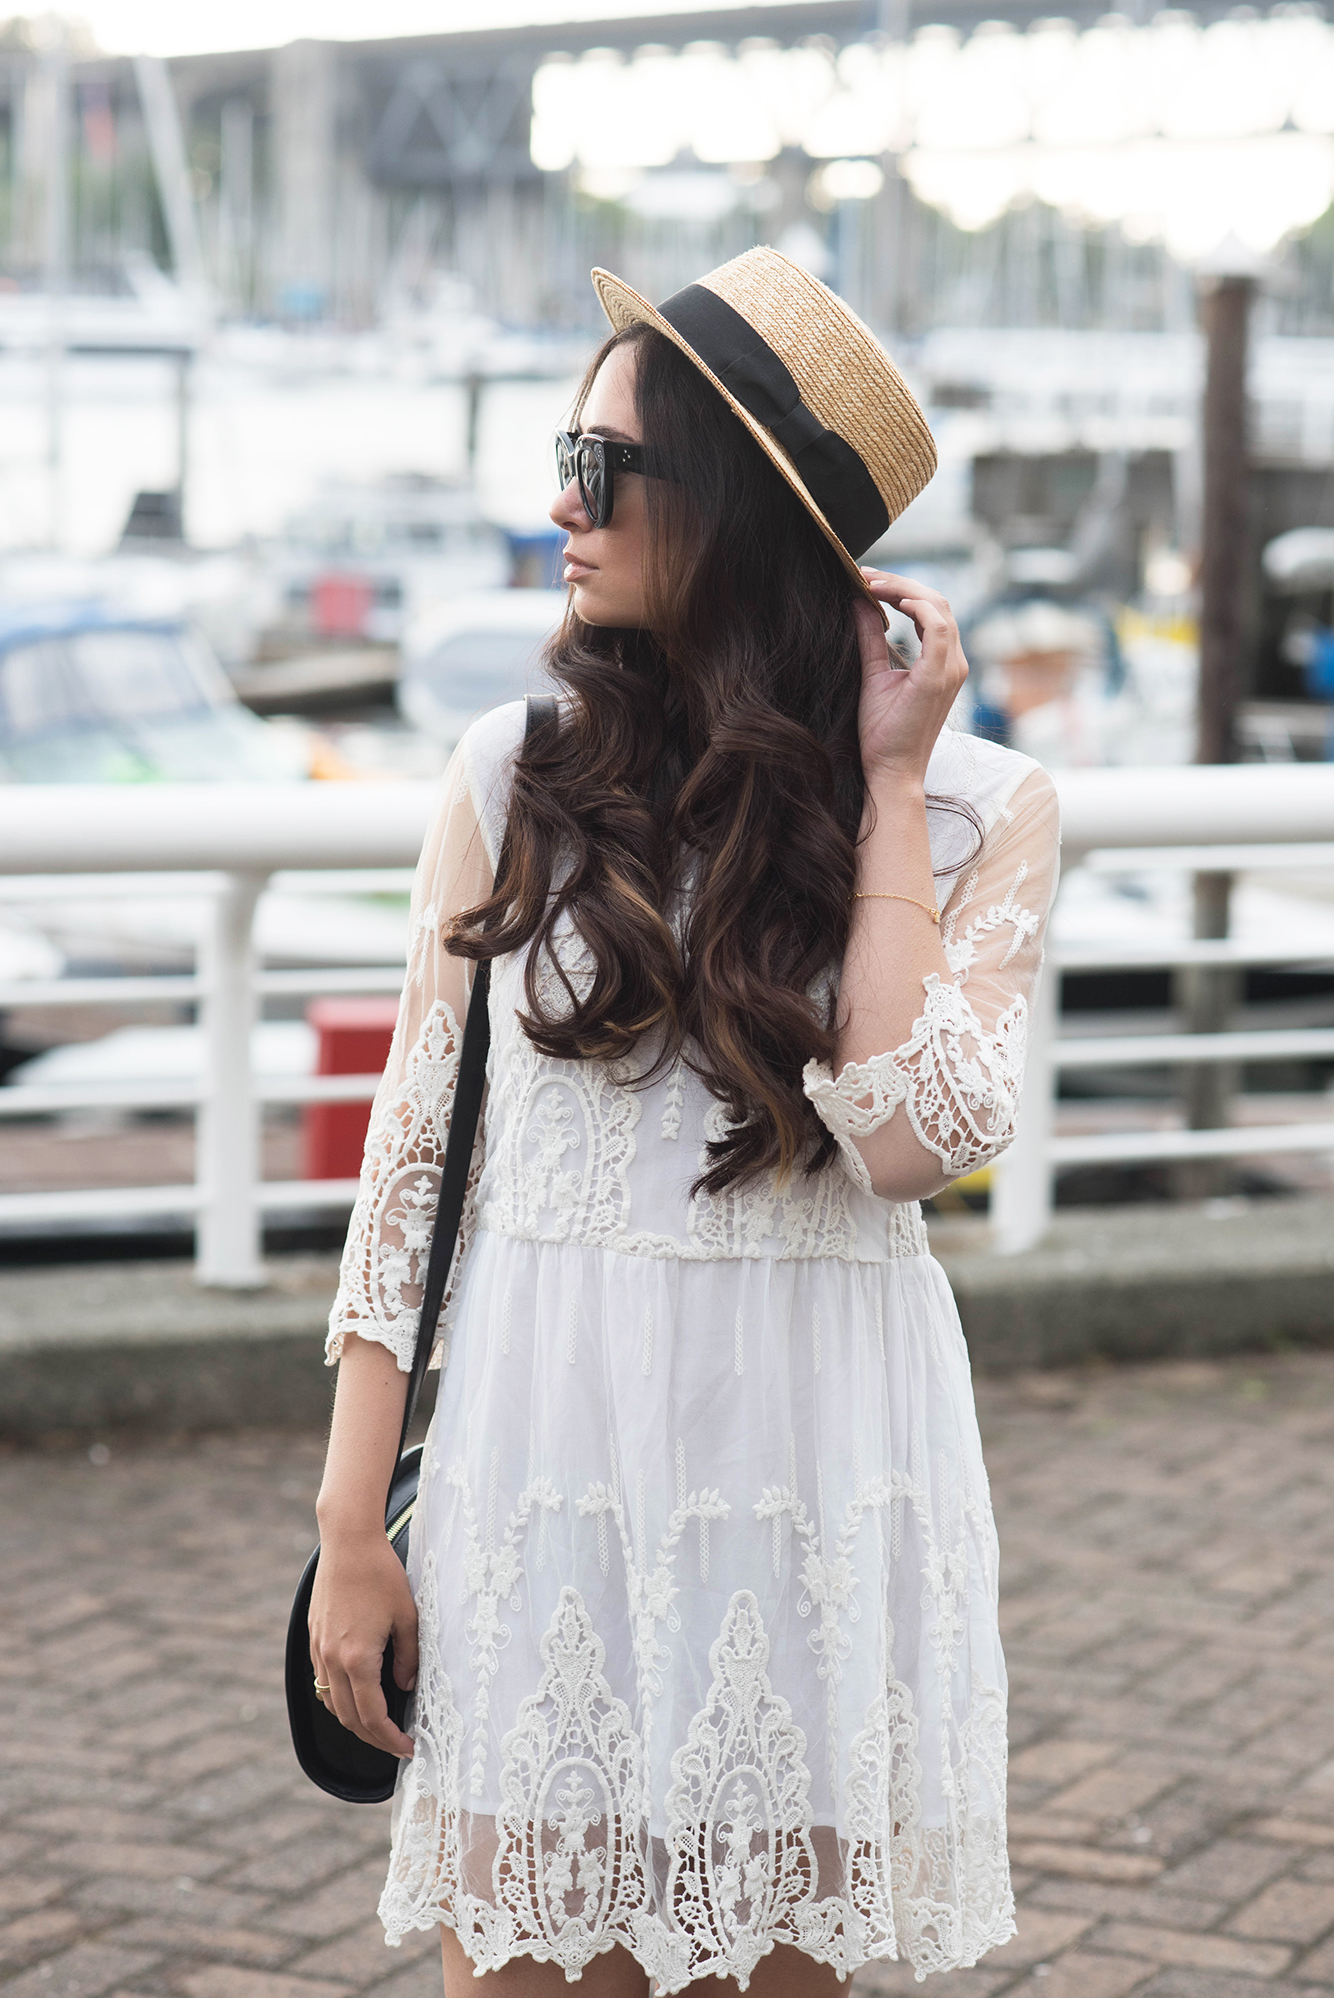 coco-and-vera-top-vancouver-fashion-blog-top-canadian-fashion-blog-top-blogger-portrait-cee-fardoe-brunette-celine-sunglasses-straw-boater-chicwish-lace-dress